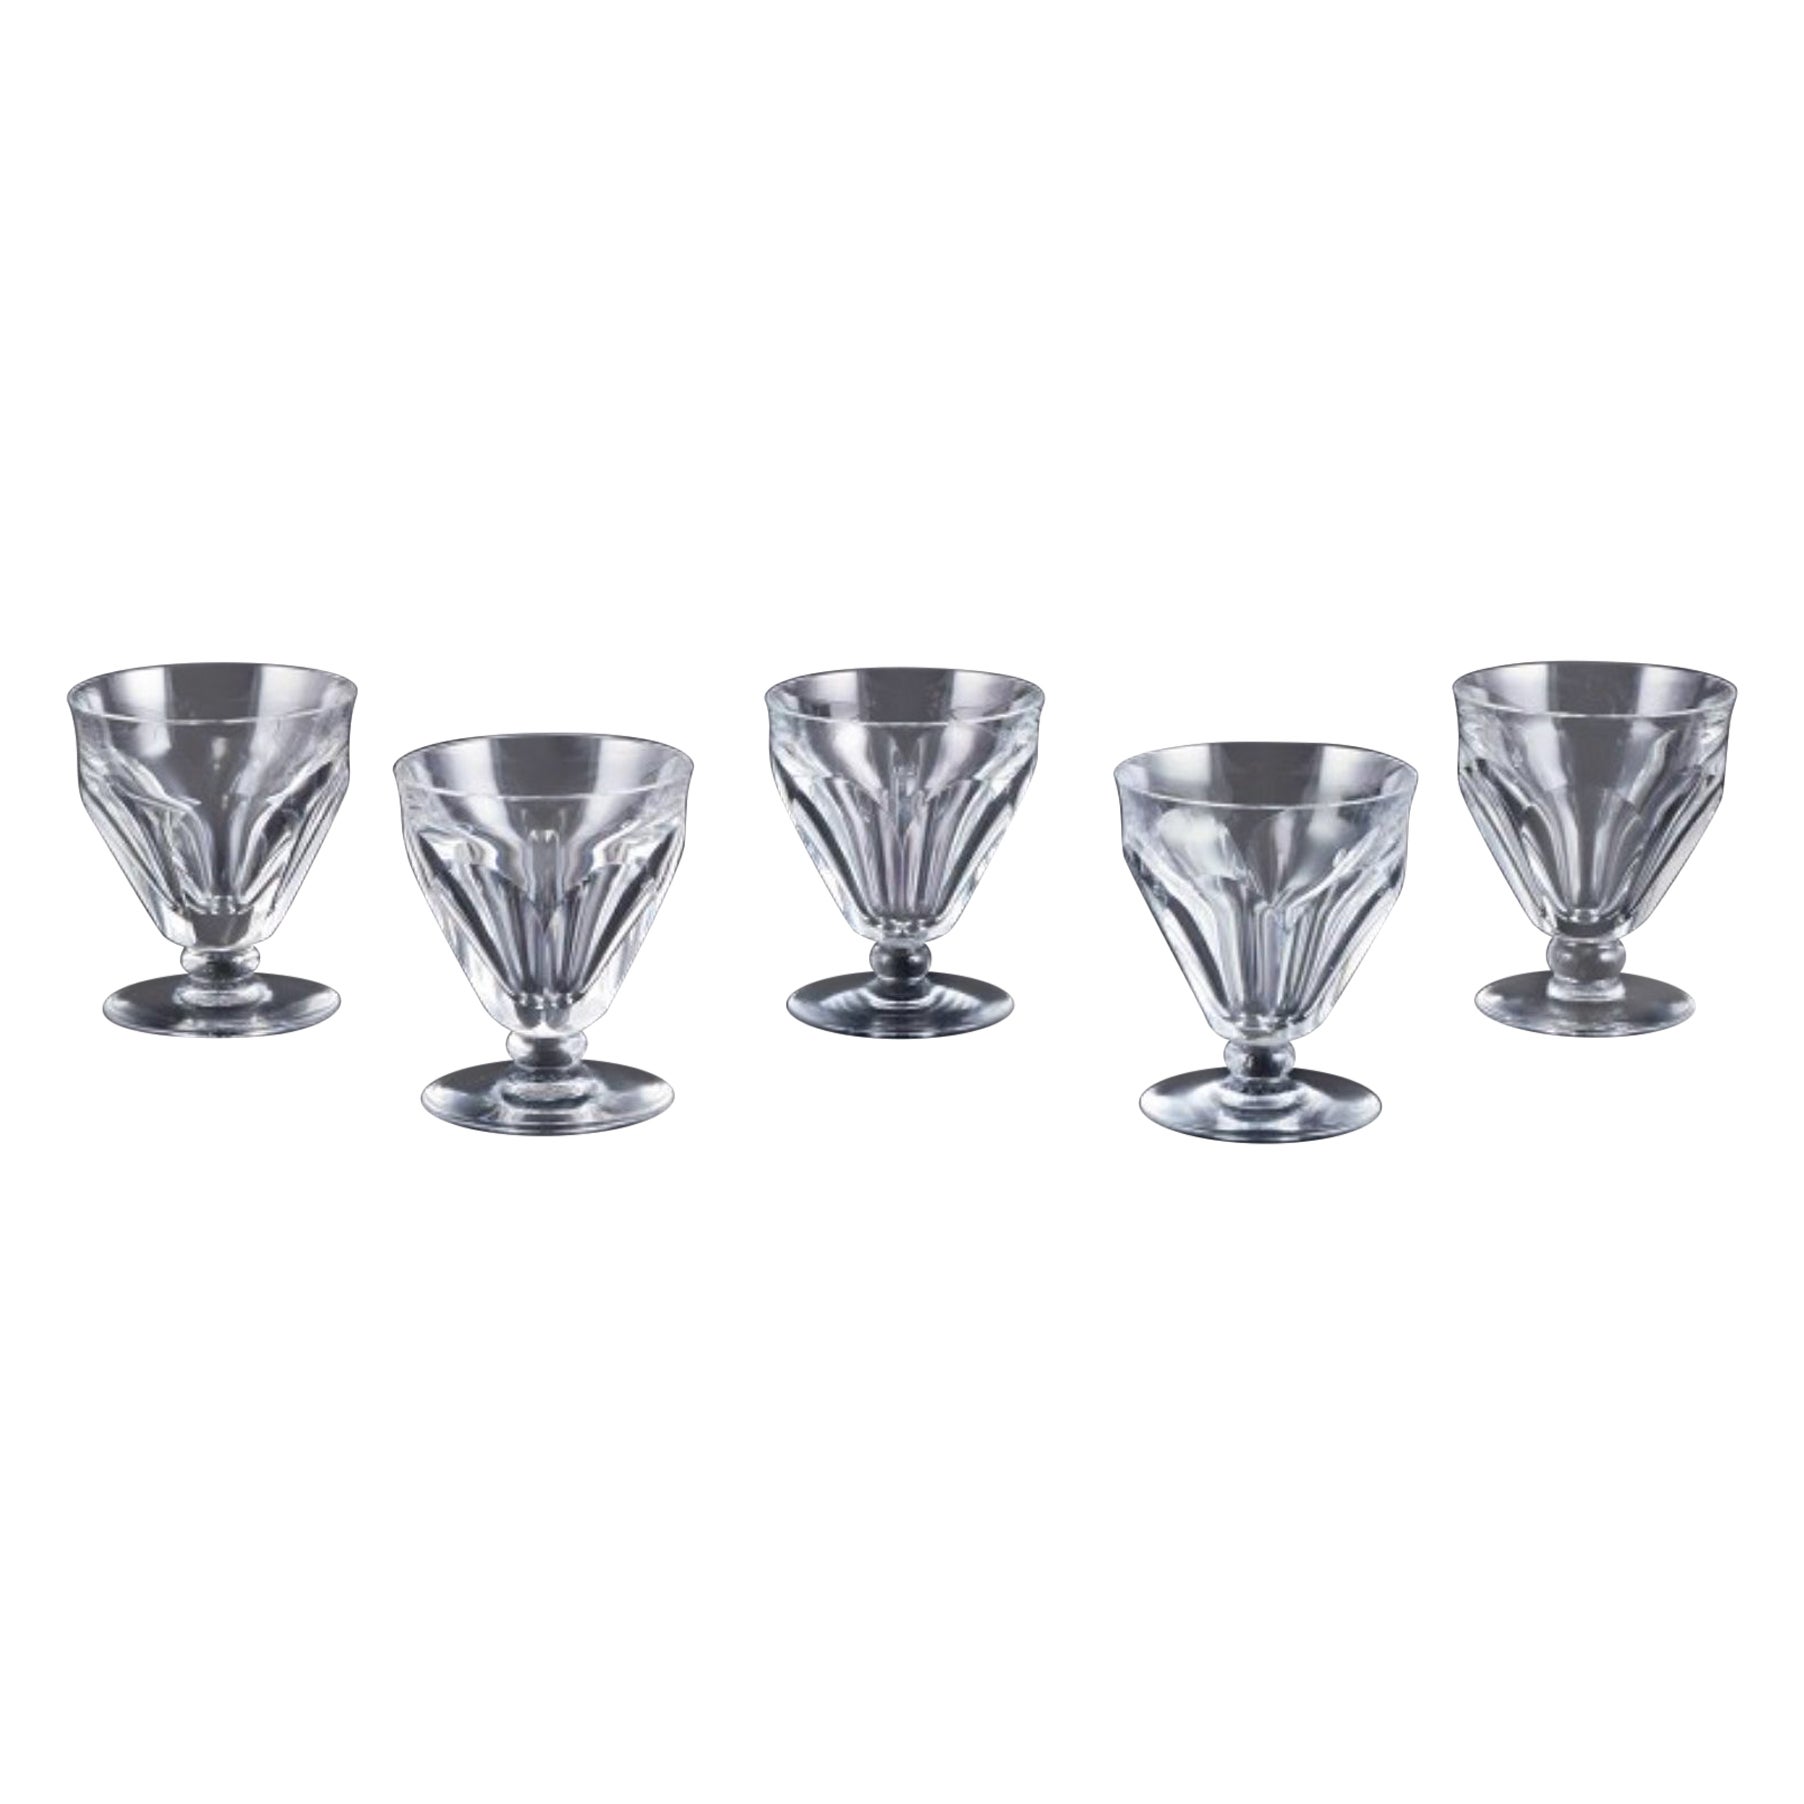 Baccarat, France. Set of five Art Deco sherry glasses in faceted crystal glass